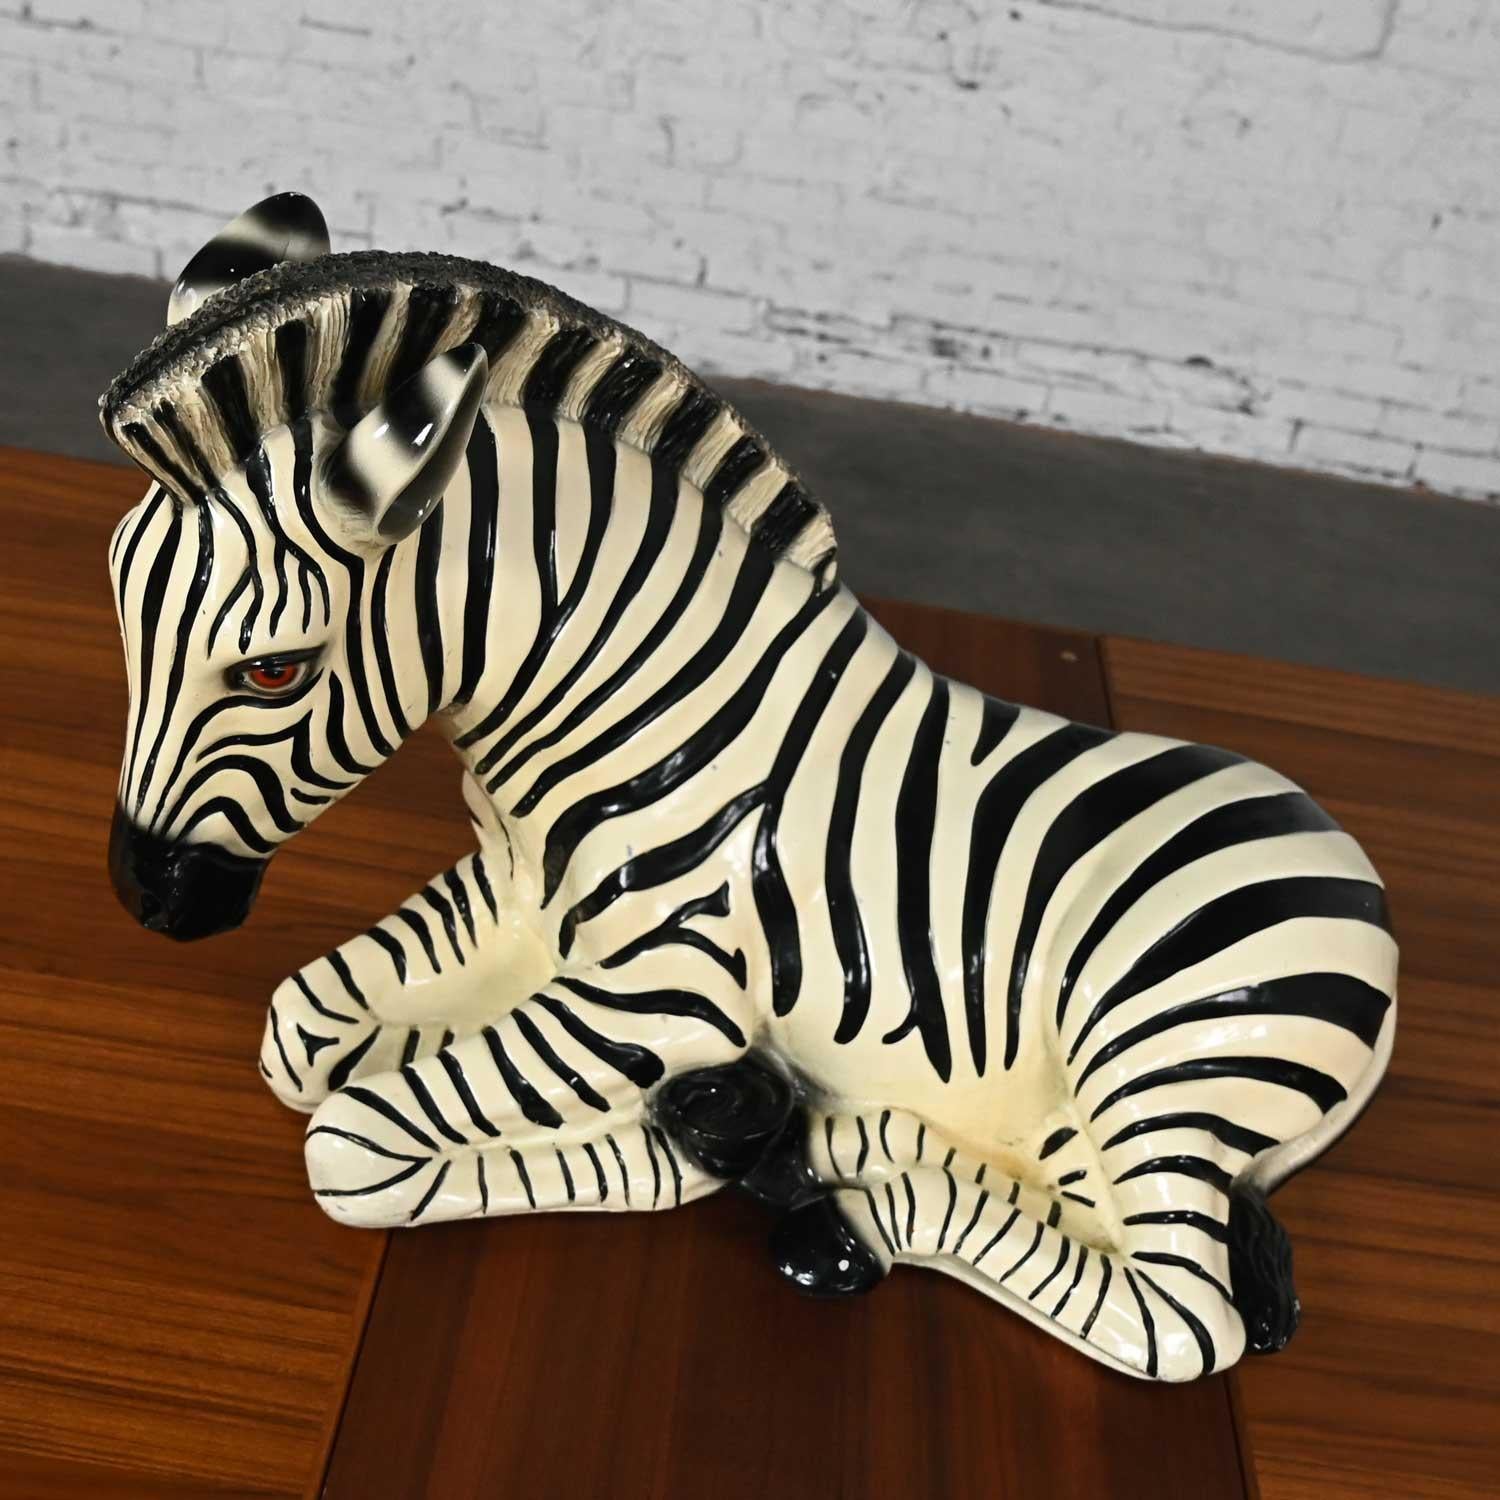 1970s Marwal Industries Large Scale Zebra Molded Resin Statue or Sculpture For Sale 2